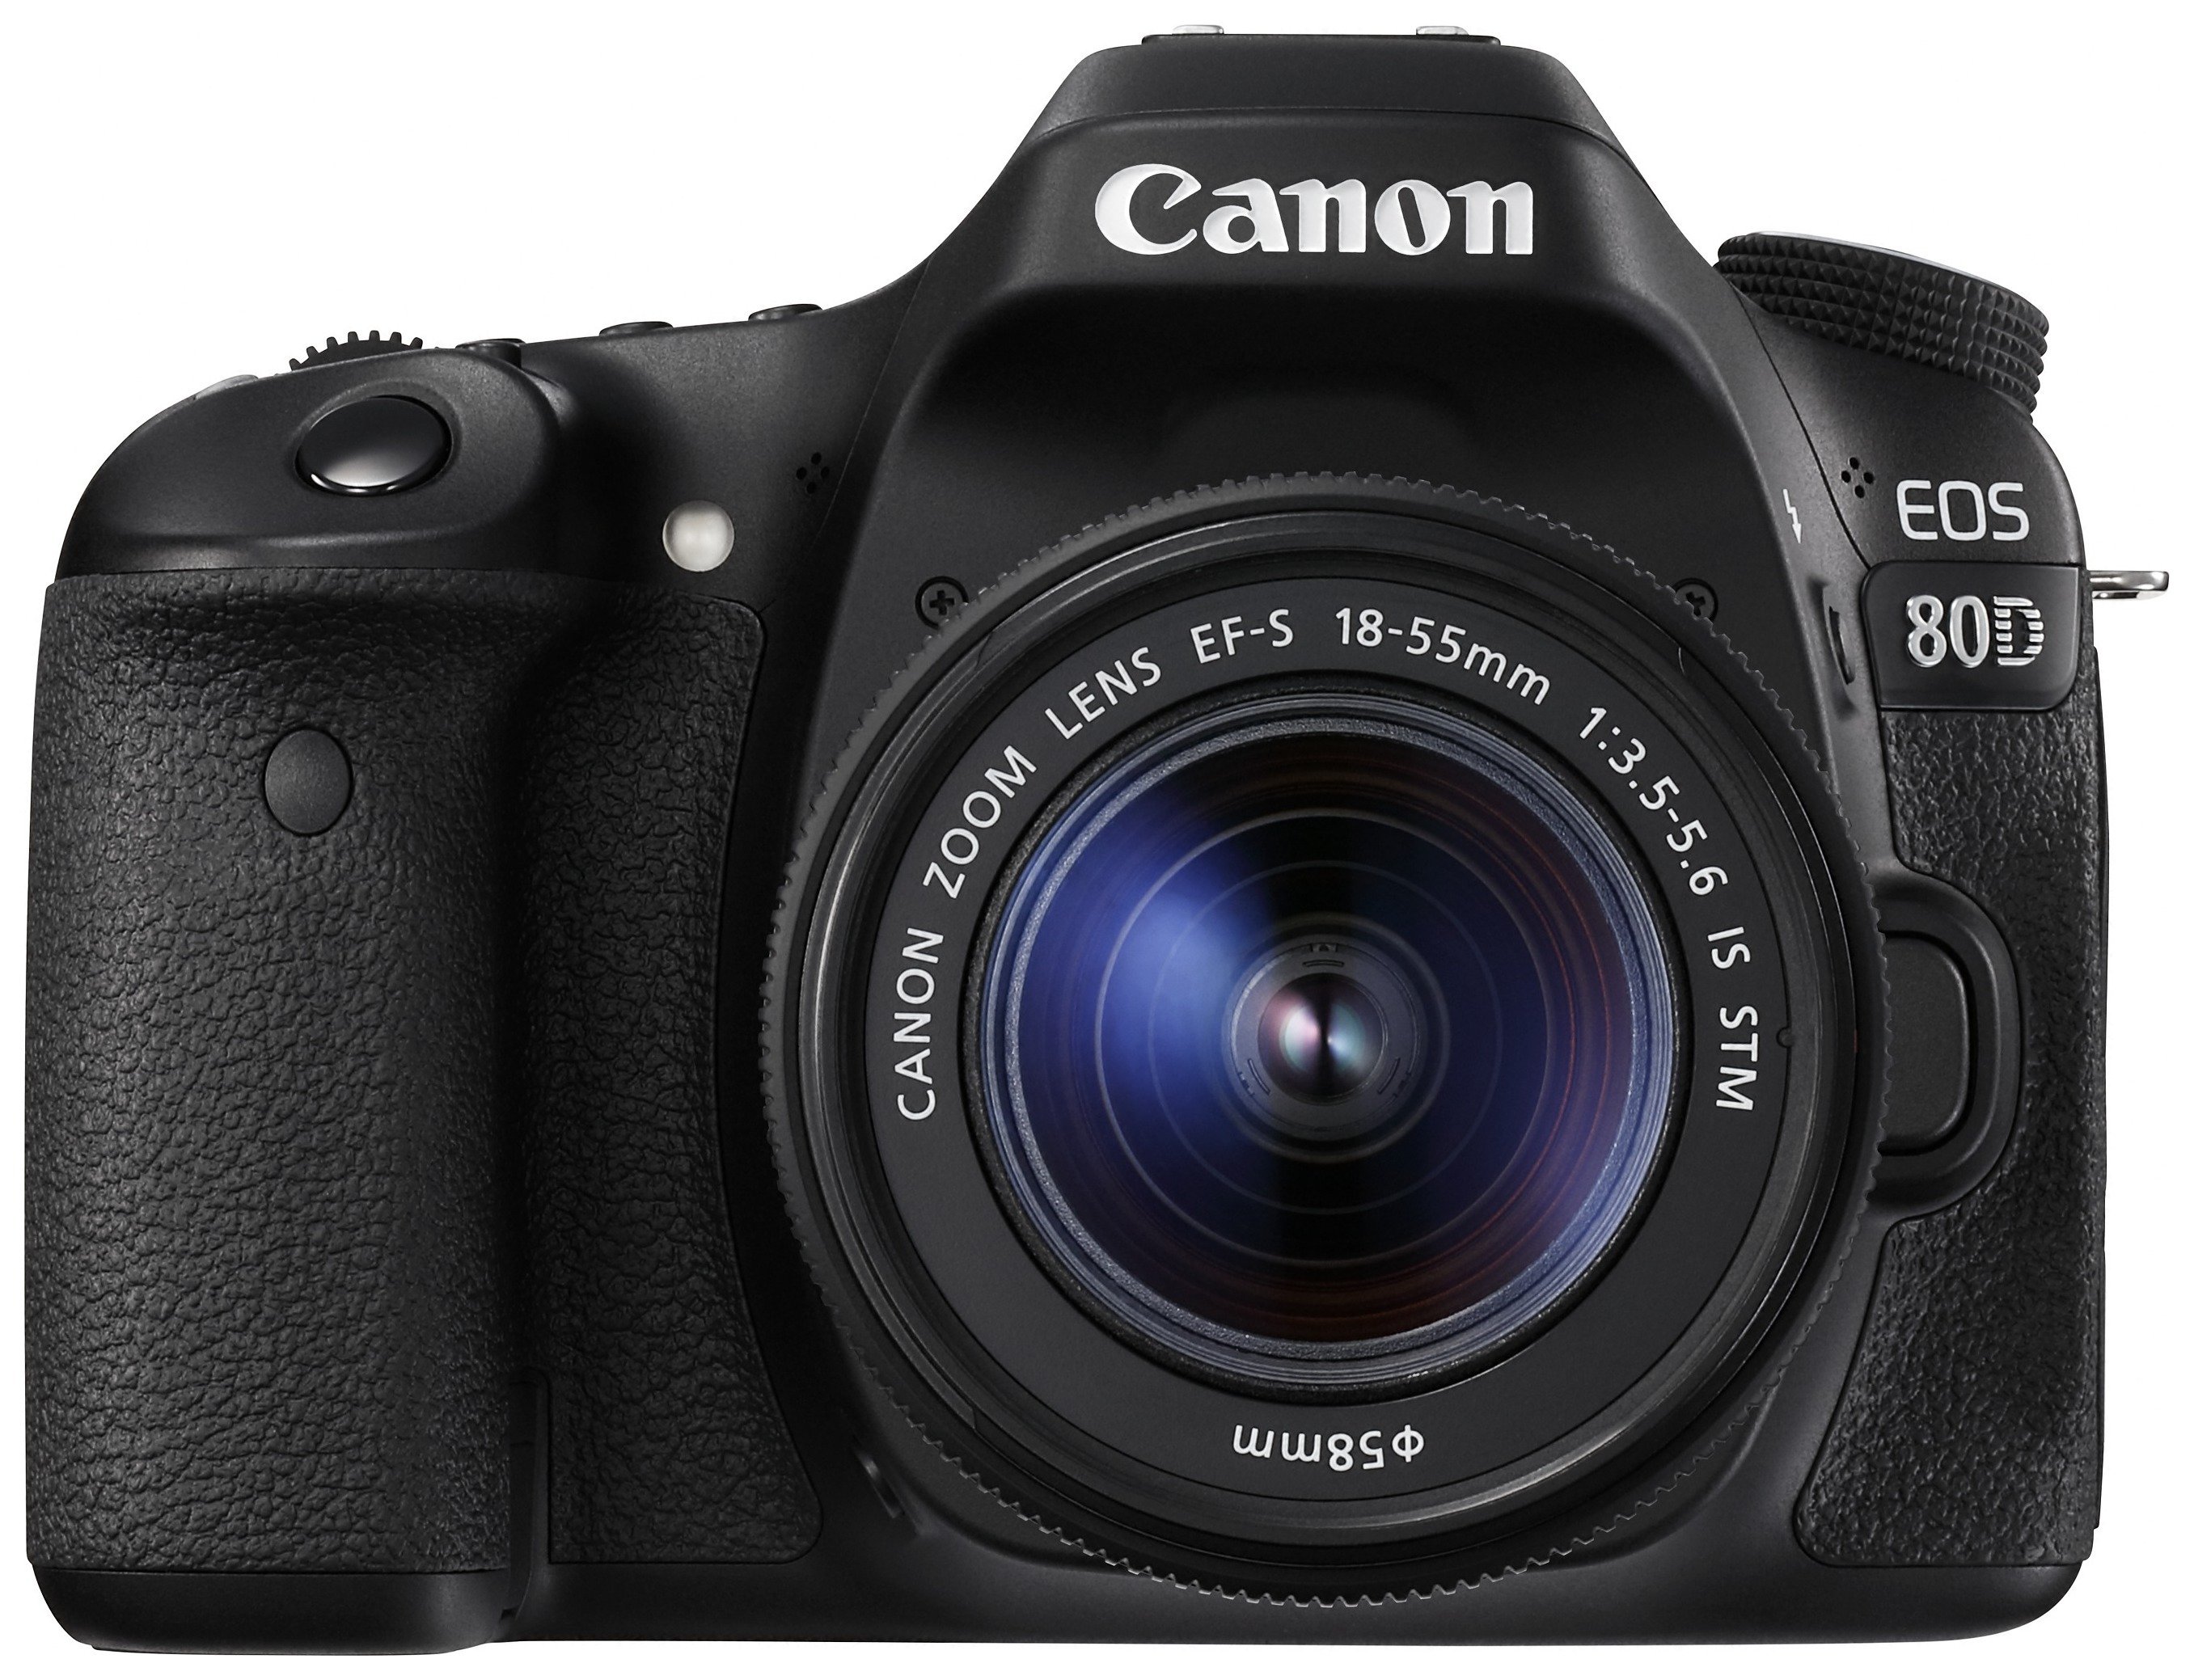 Canon EOS 80D DSLR Camera with 18-55mm IS STM Lens